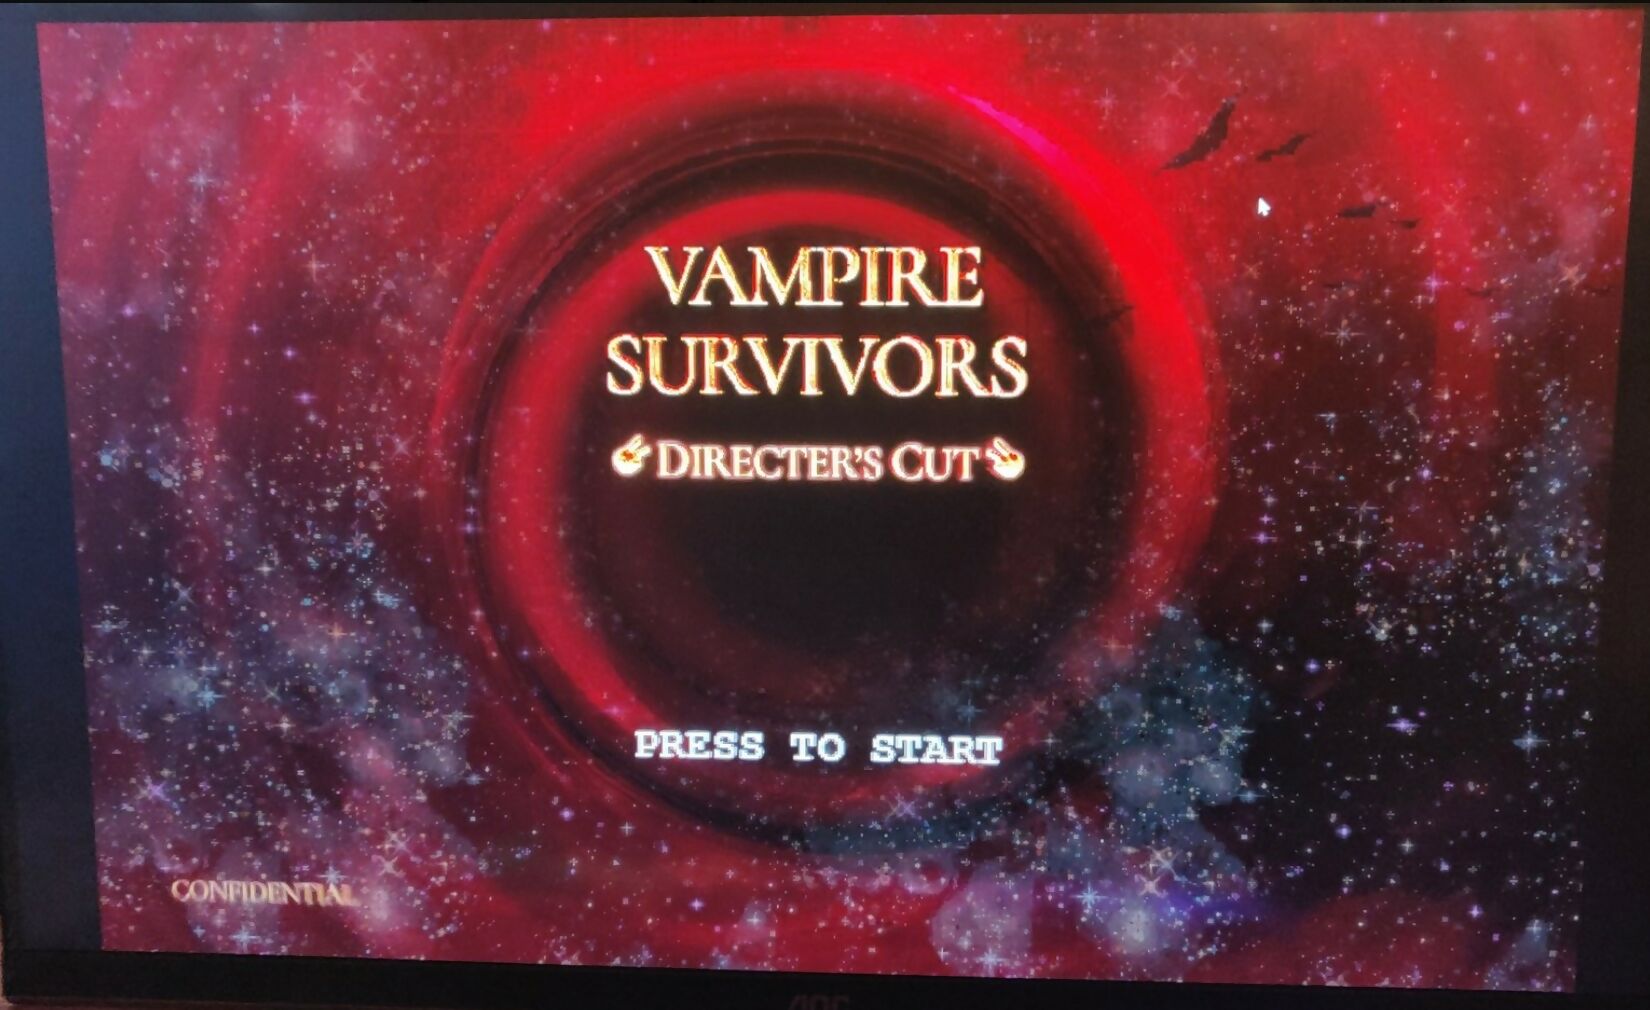 Vampire Survivors: Directer's Cut' reportedly features a huge